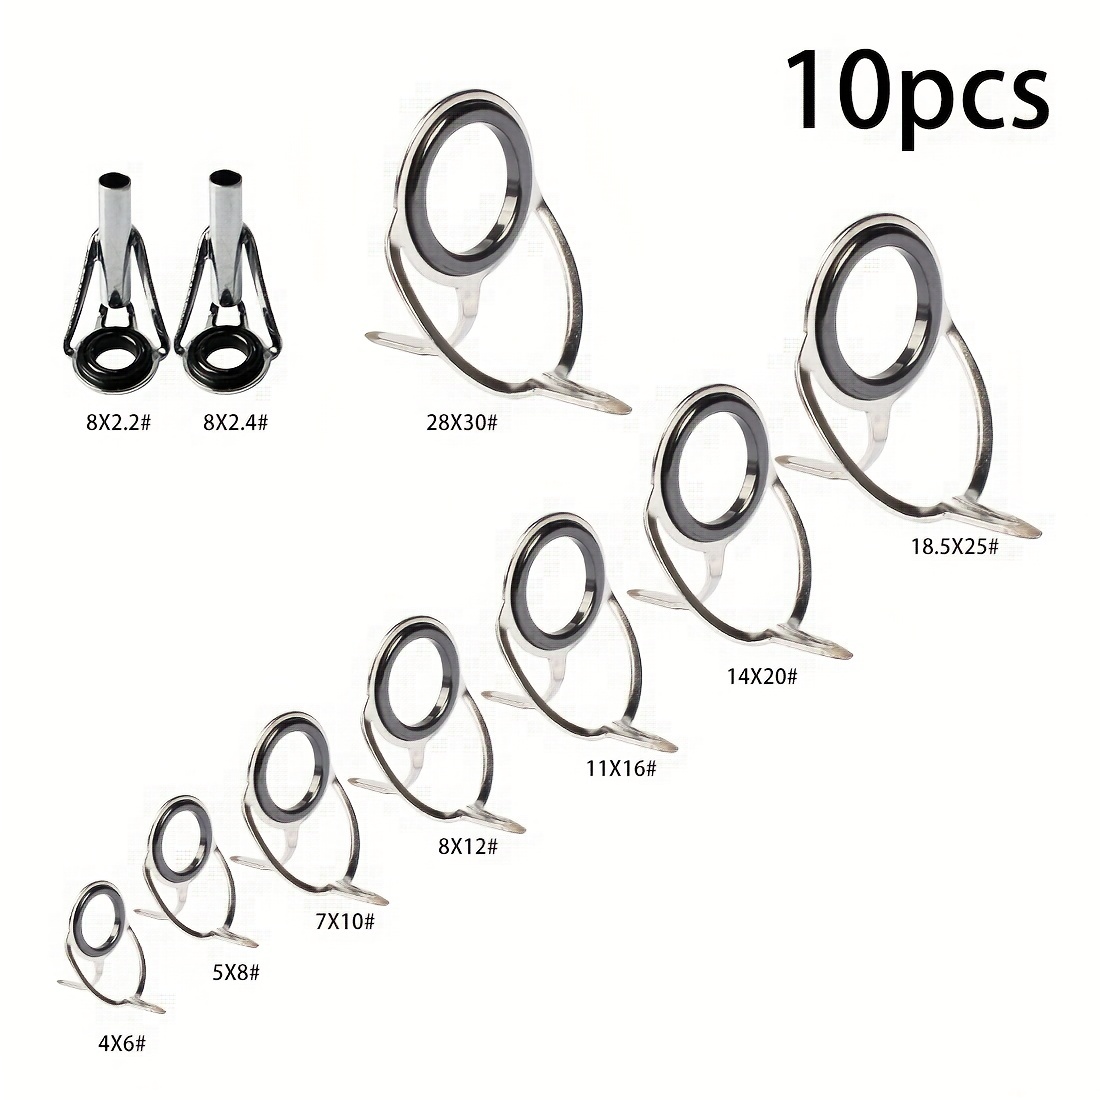 250pcs/lot Stainless Steel Double Loop Fishing Ring 5 Size Mixed